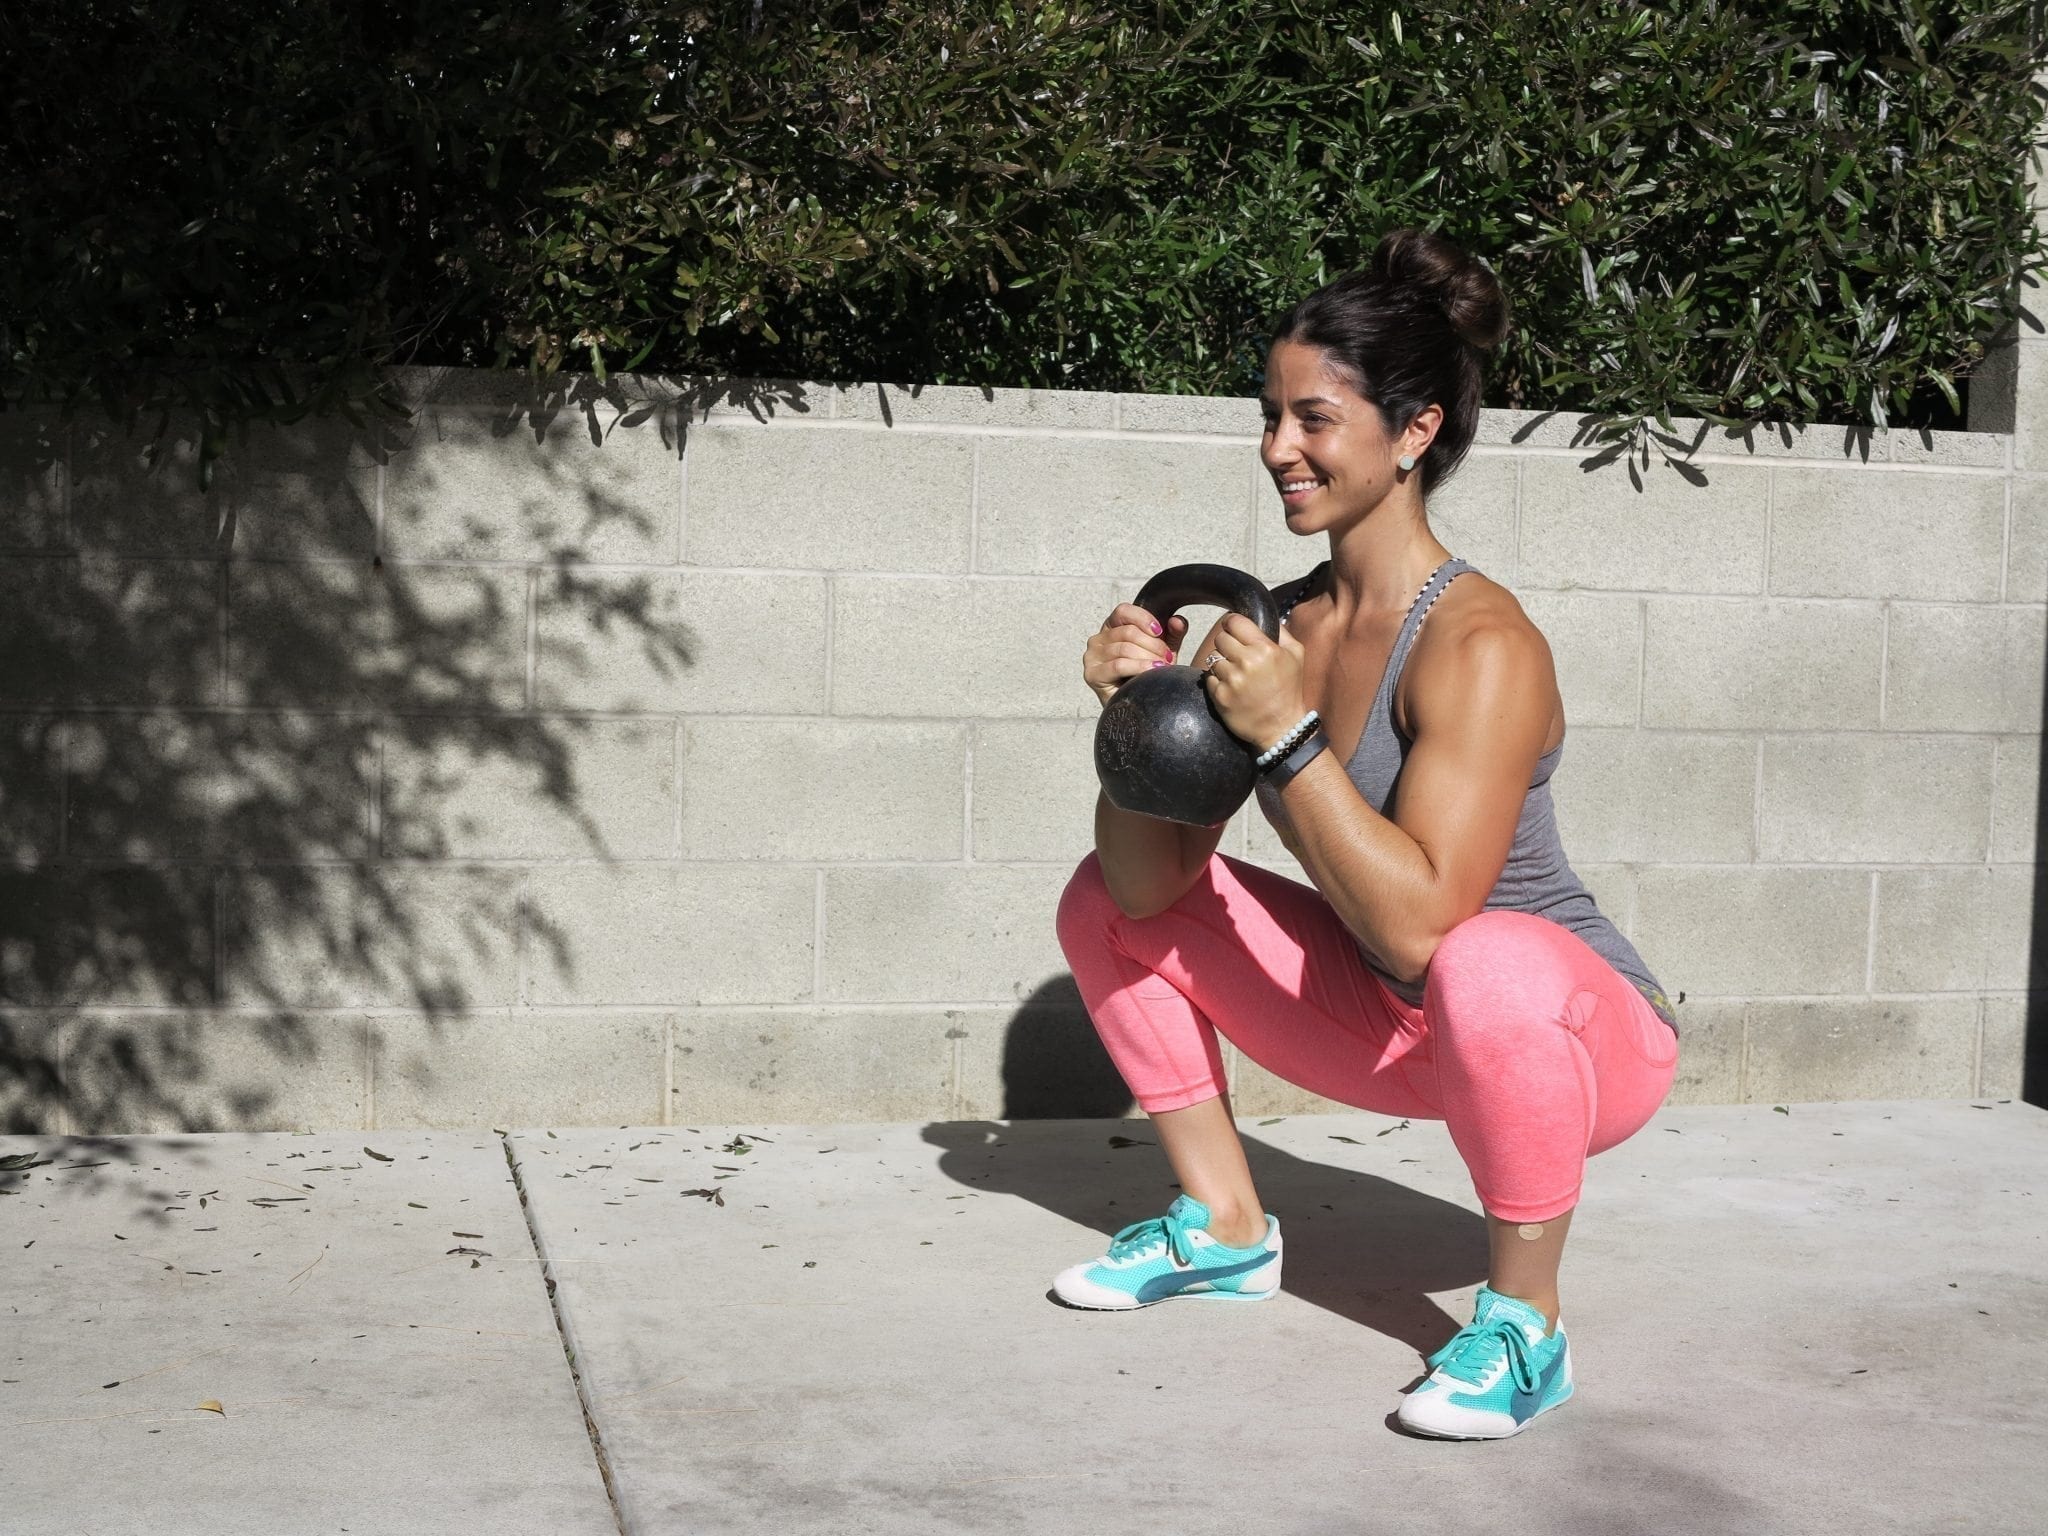 5 Reasons Kettlebells Are Great for Women | MyFitnessPal2048 x 1536